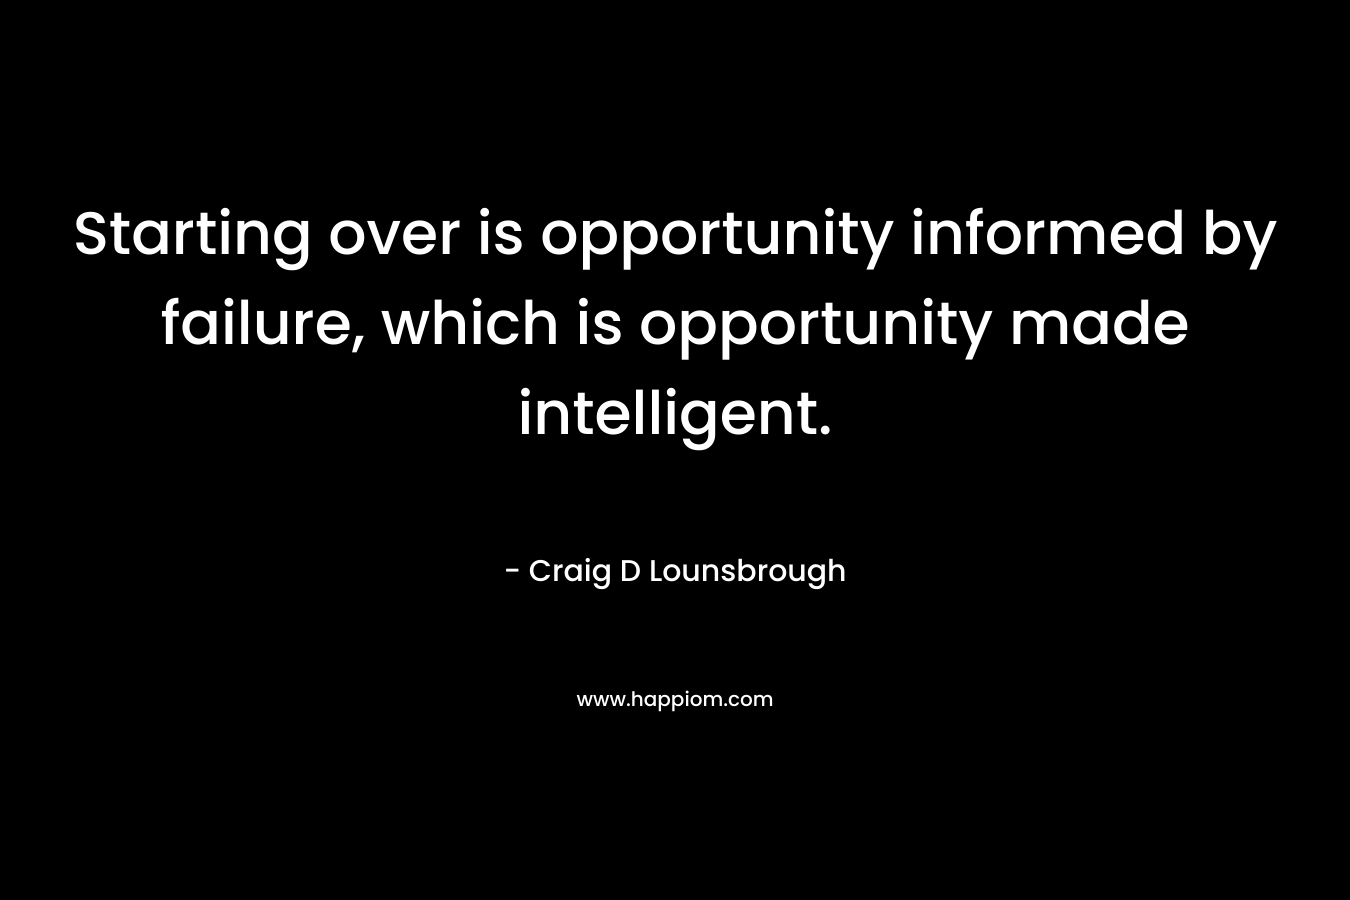 Starting over is opportunity informed by failure, which is opportunity made intelligent.